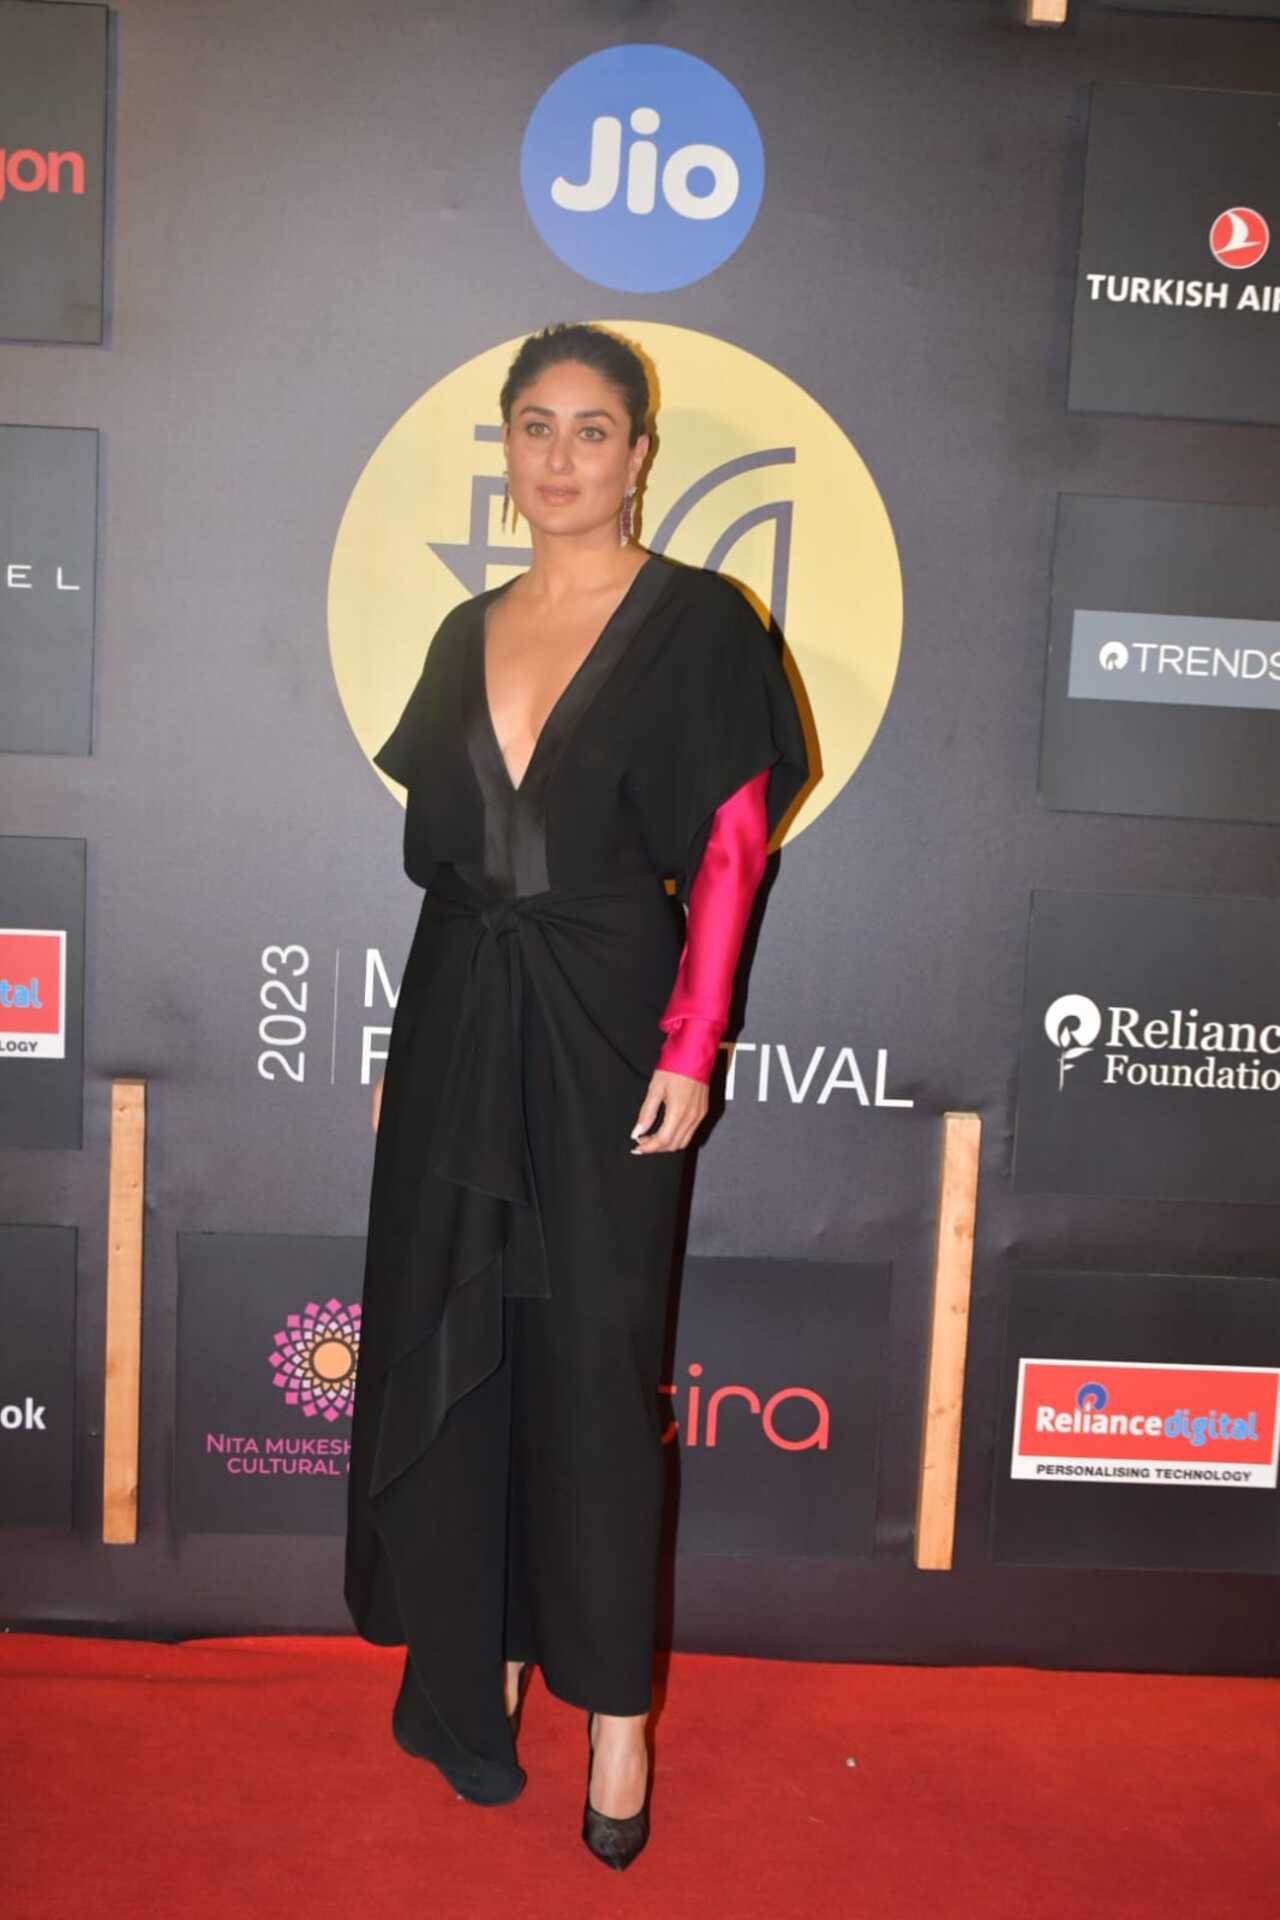 Kareena Kapoor Khan was the star of the night and the actress dressed for it